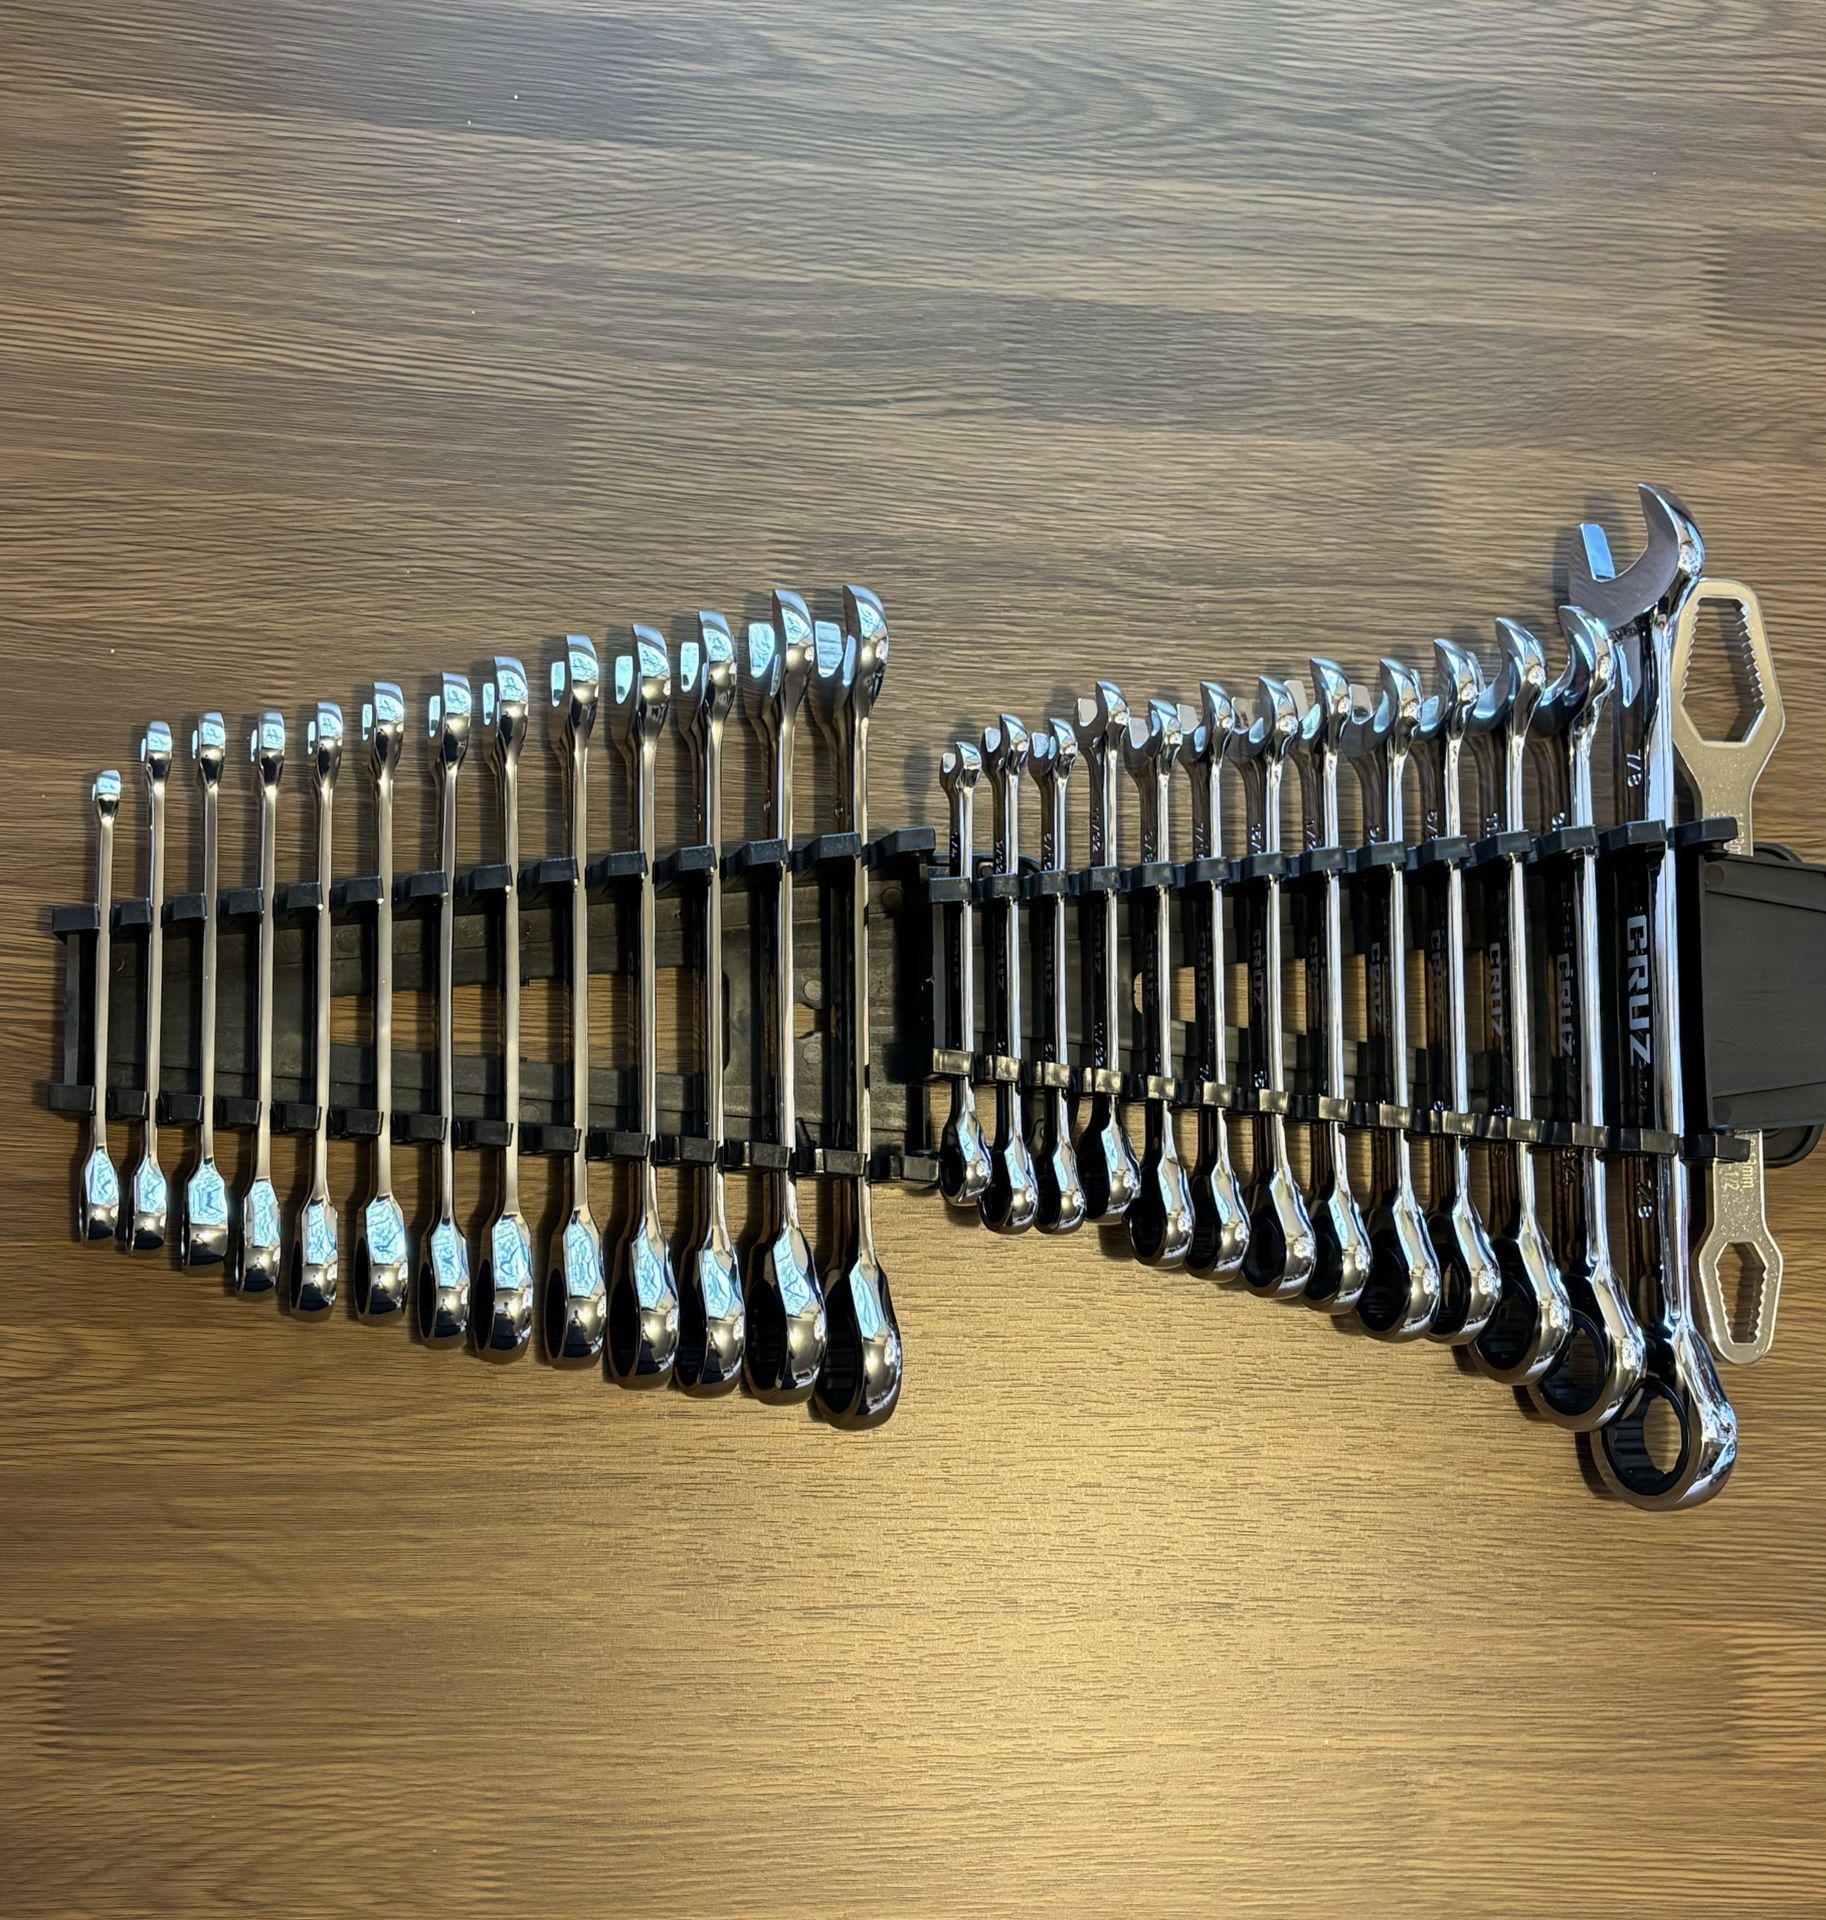 Tool sale - 27 Set ratchet wrenches never used